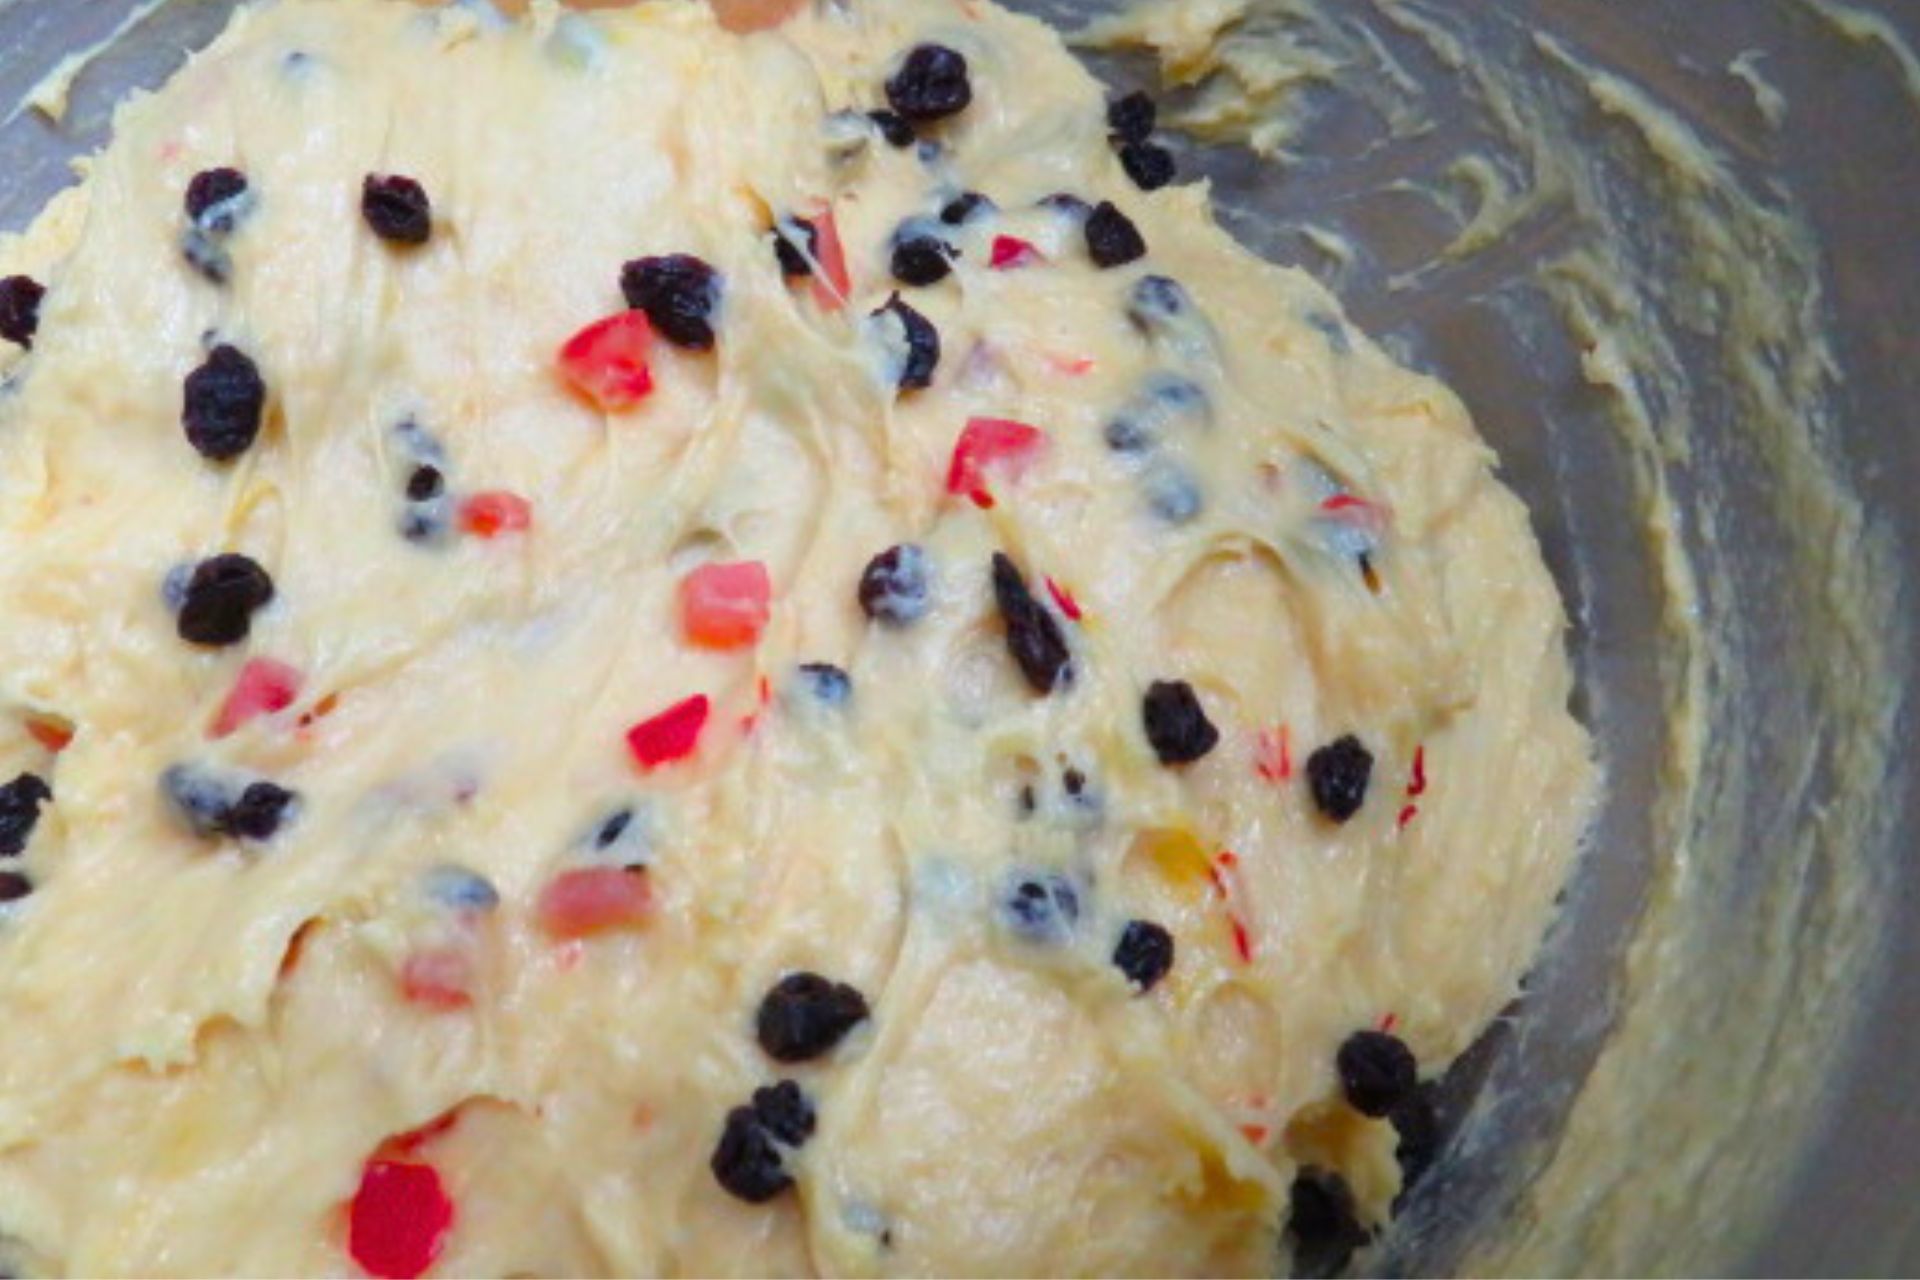 mixed fruit with the dough